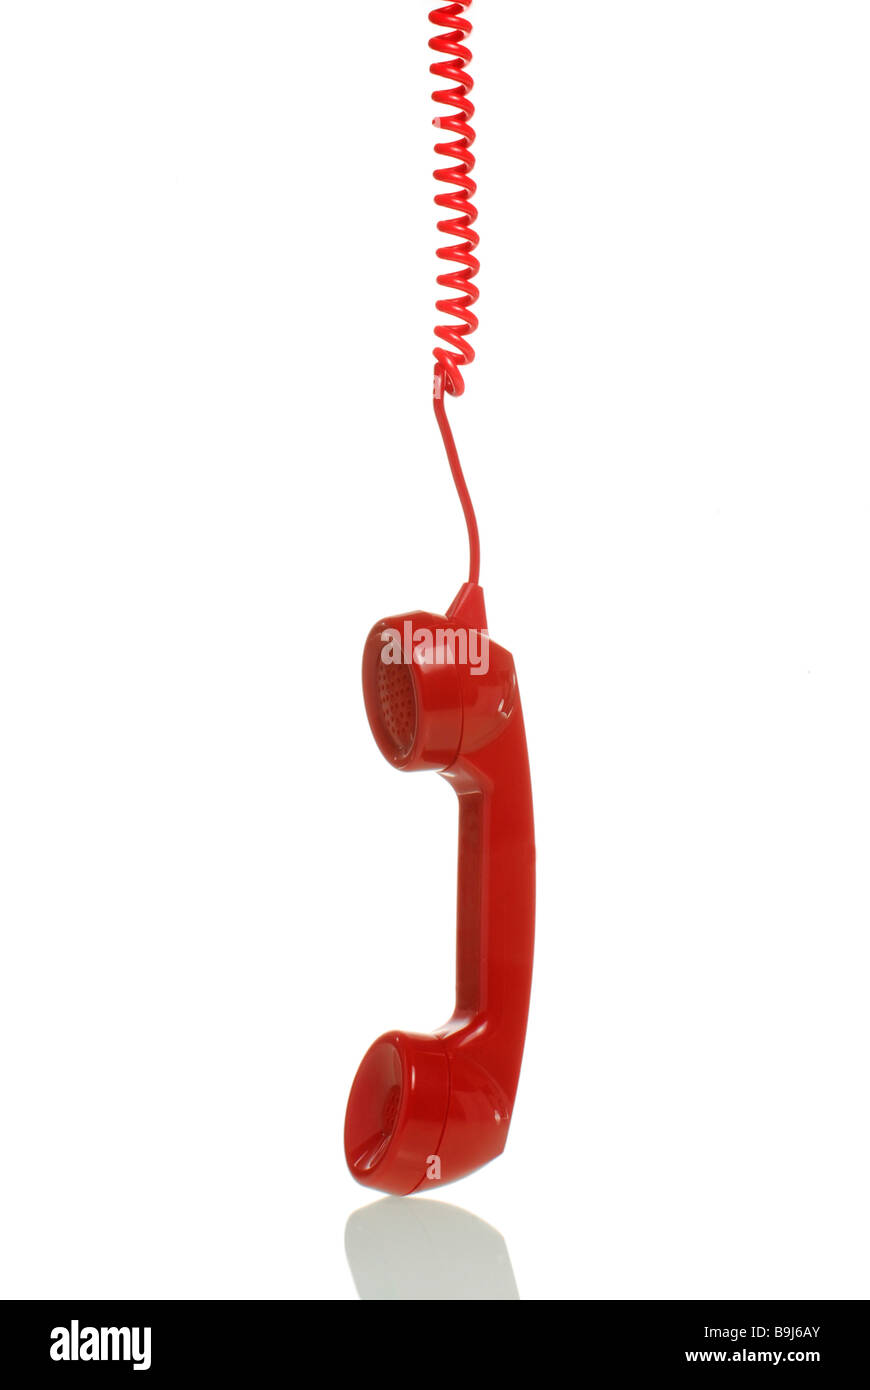 Red telephone receiver hanging down Stock Photo